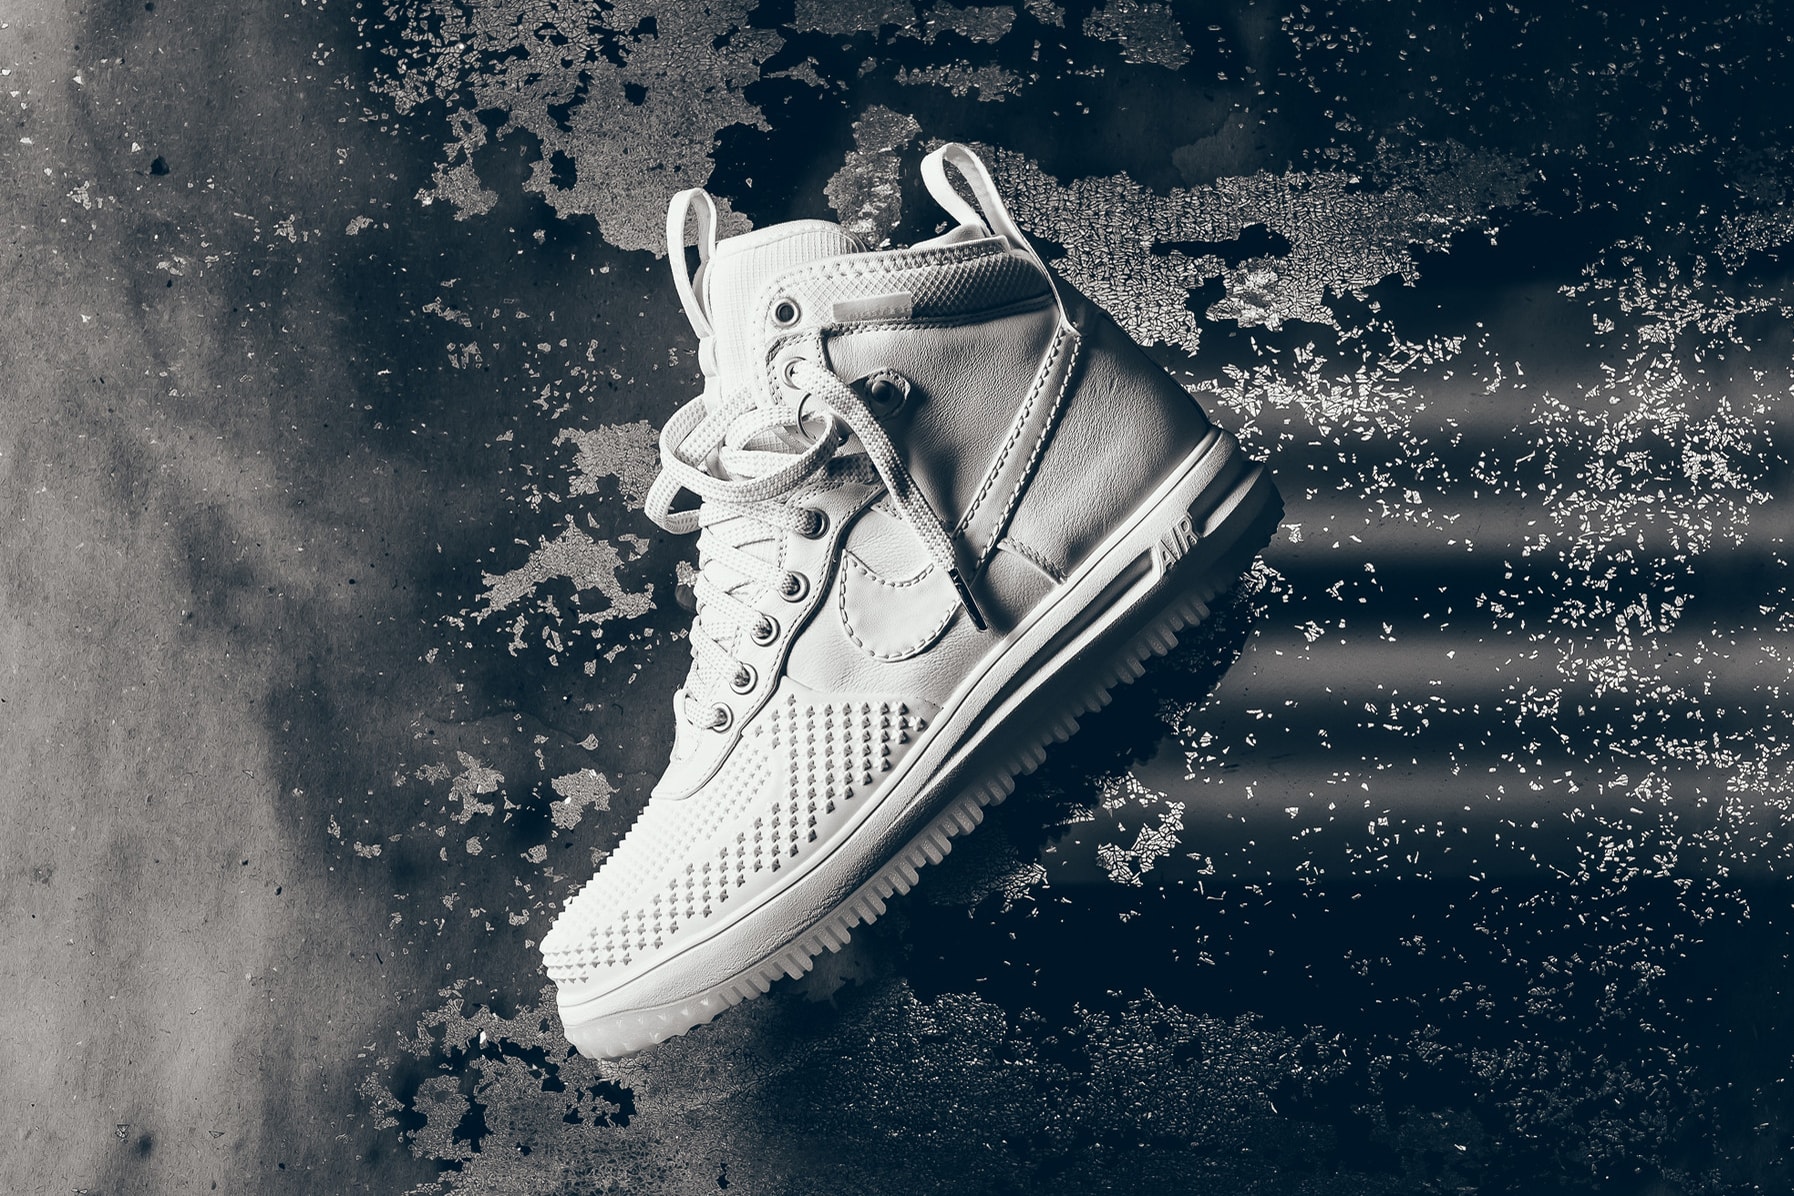 Nike Wraps the Lunar Force 1 Duckboot In Ice White | Hypebeast